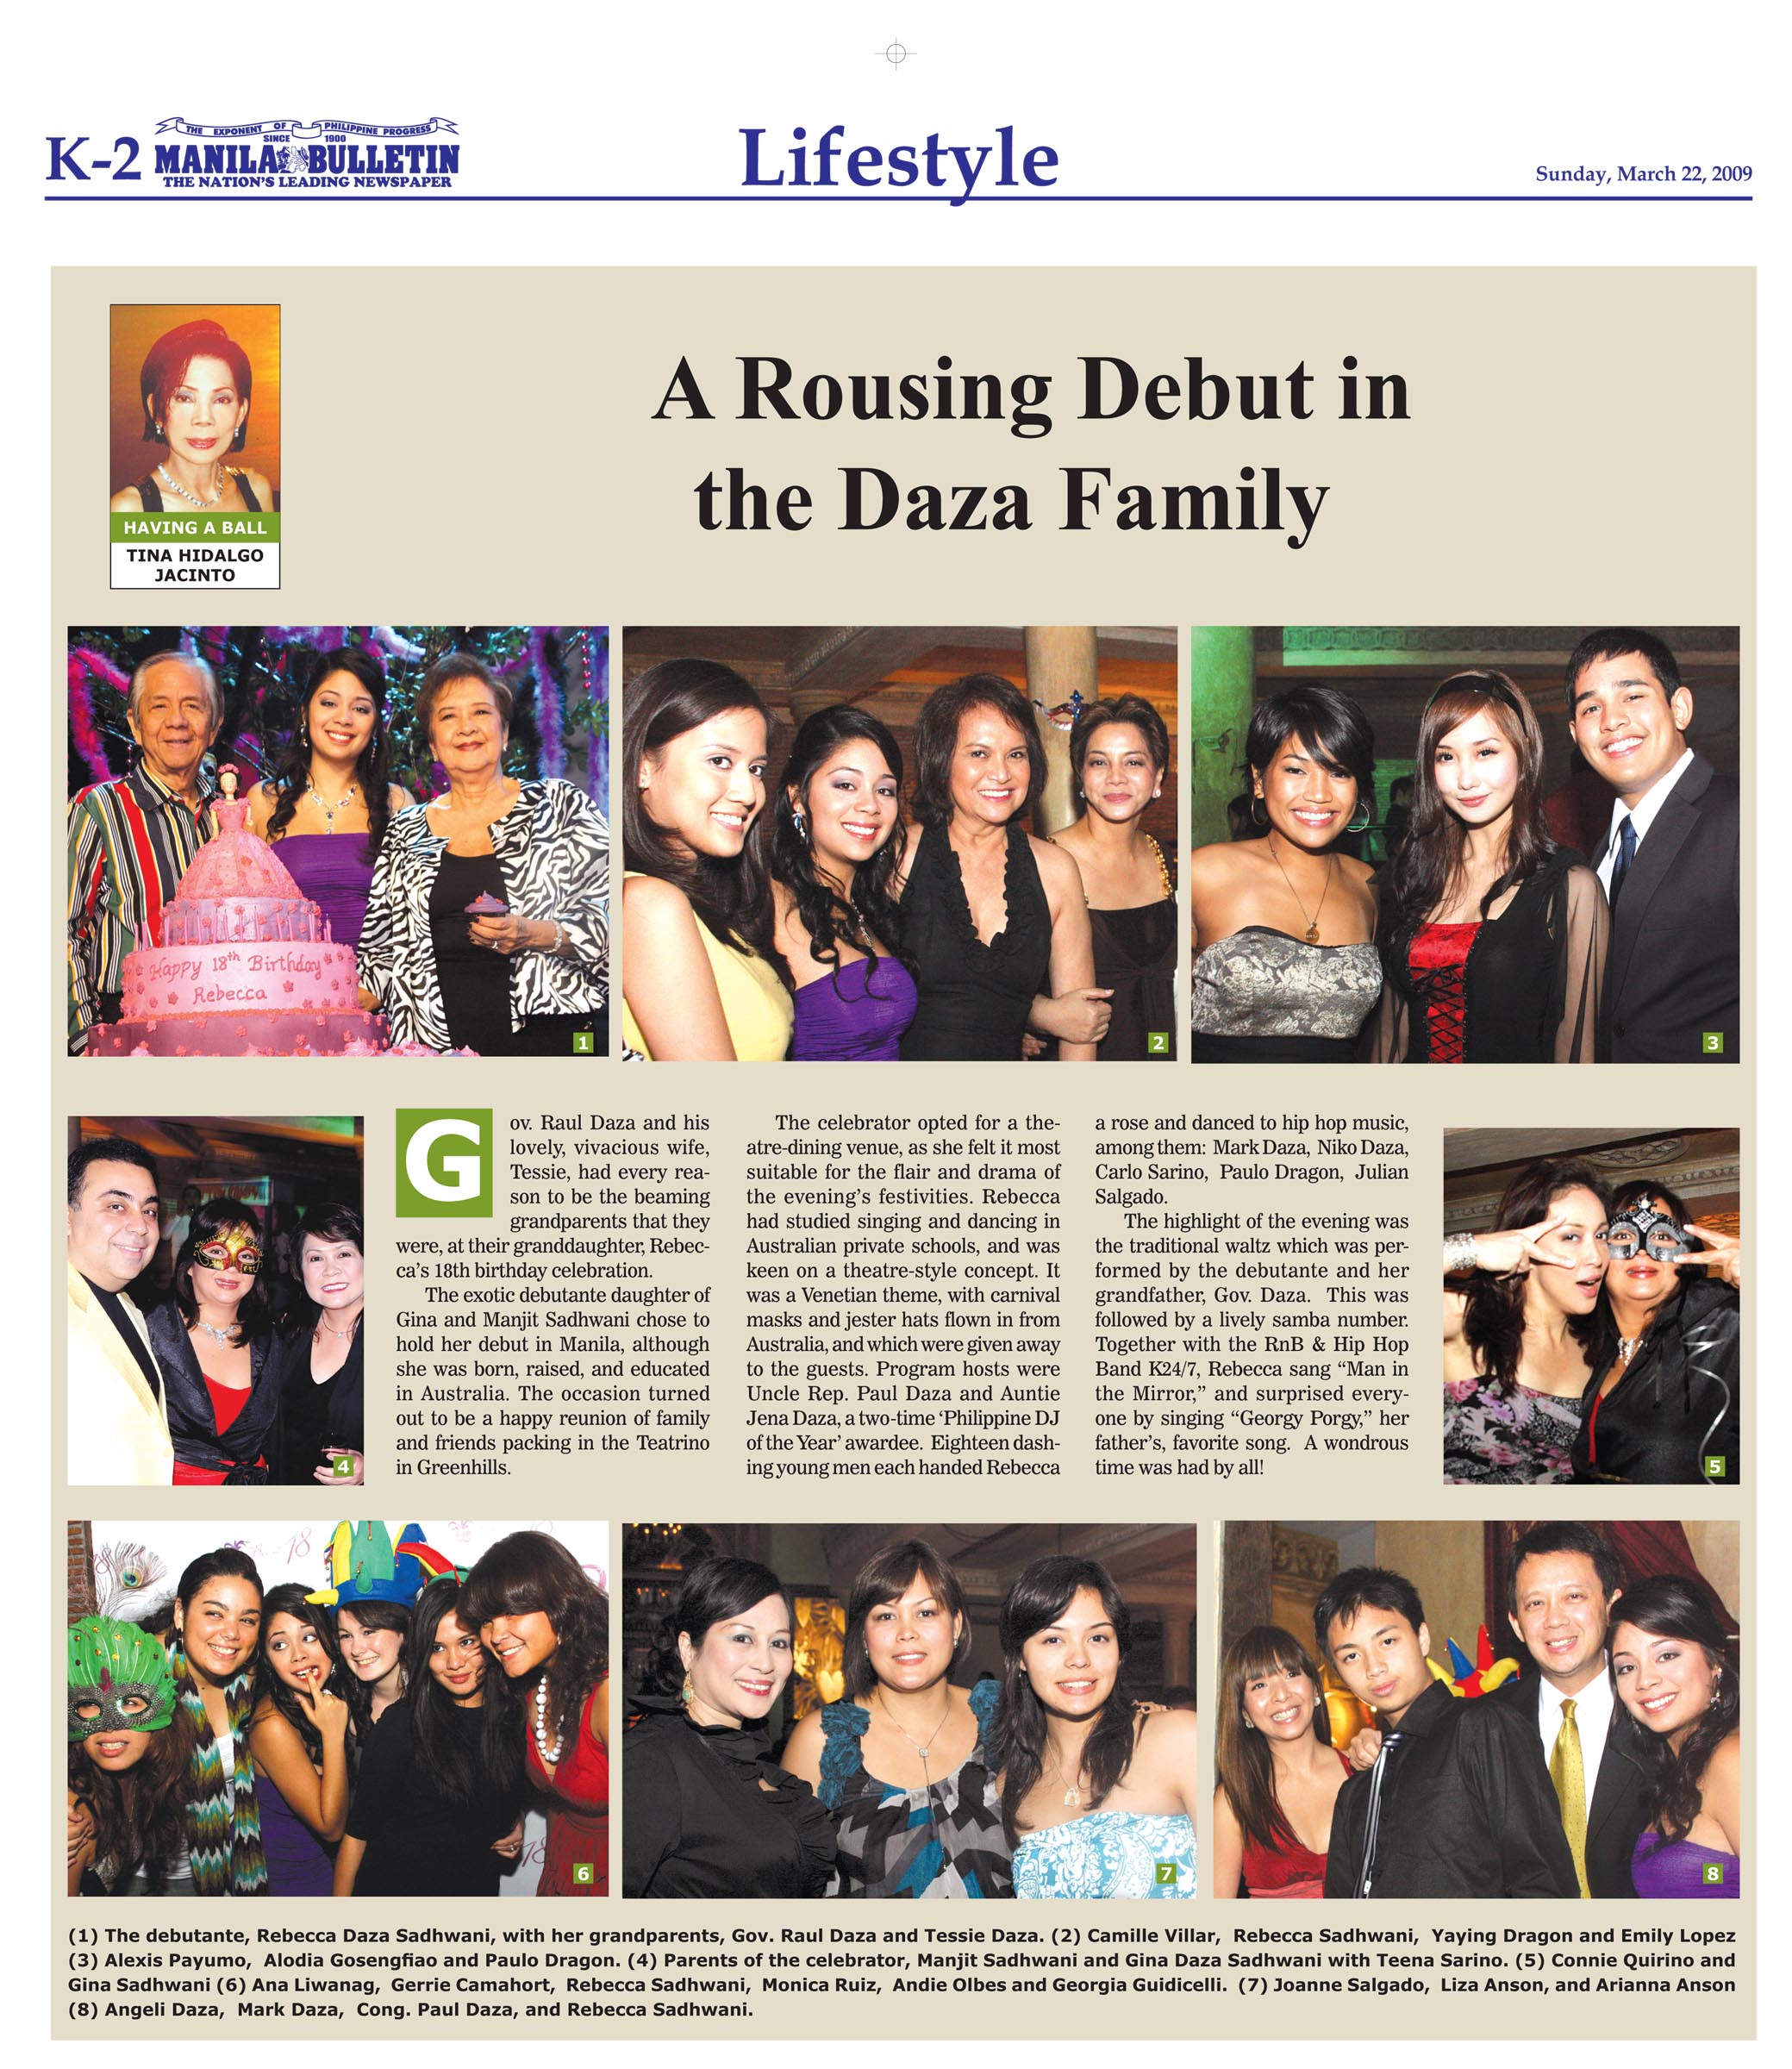 A Rousing Debut in the Daza Family